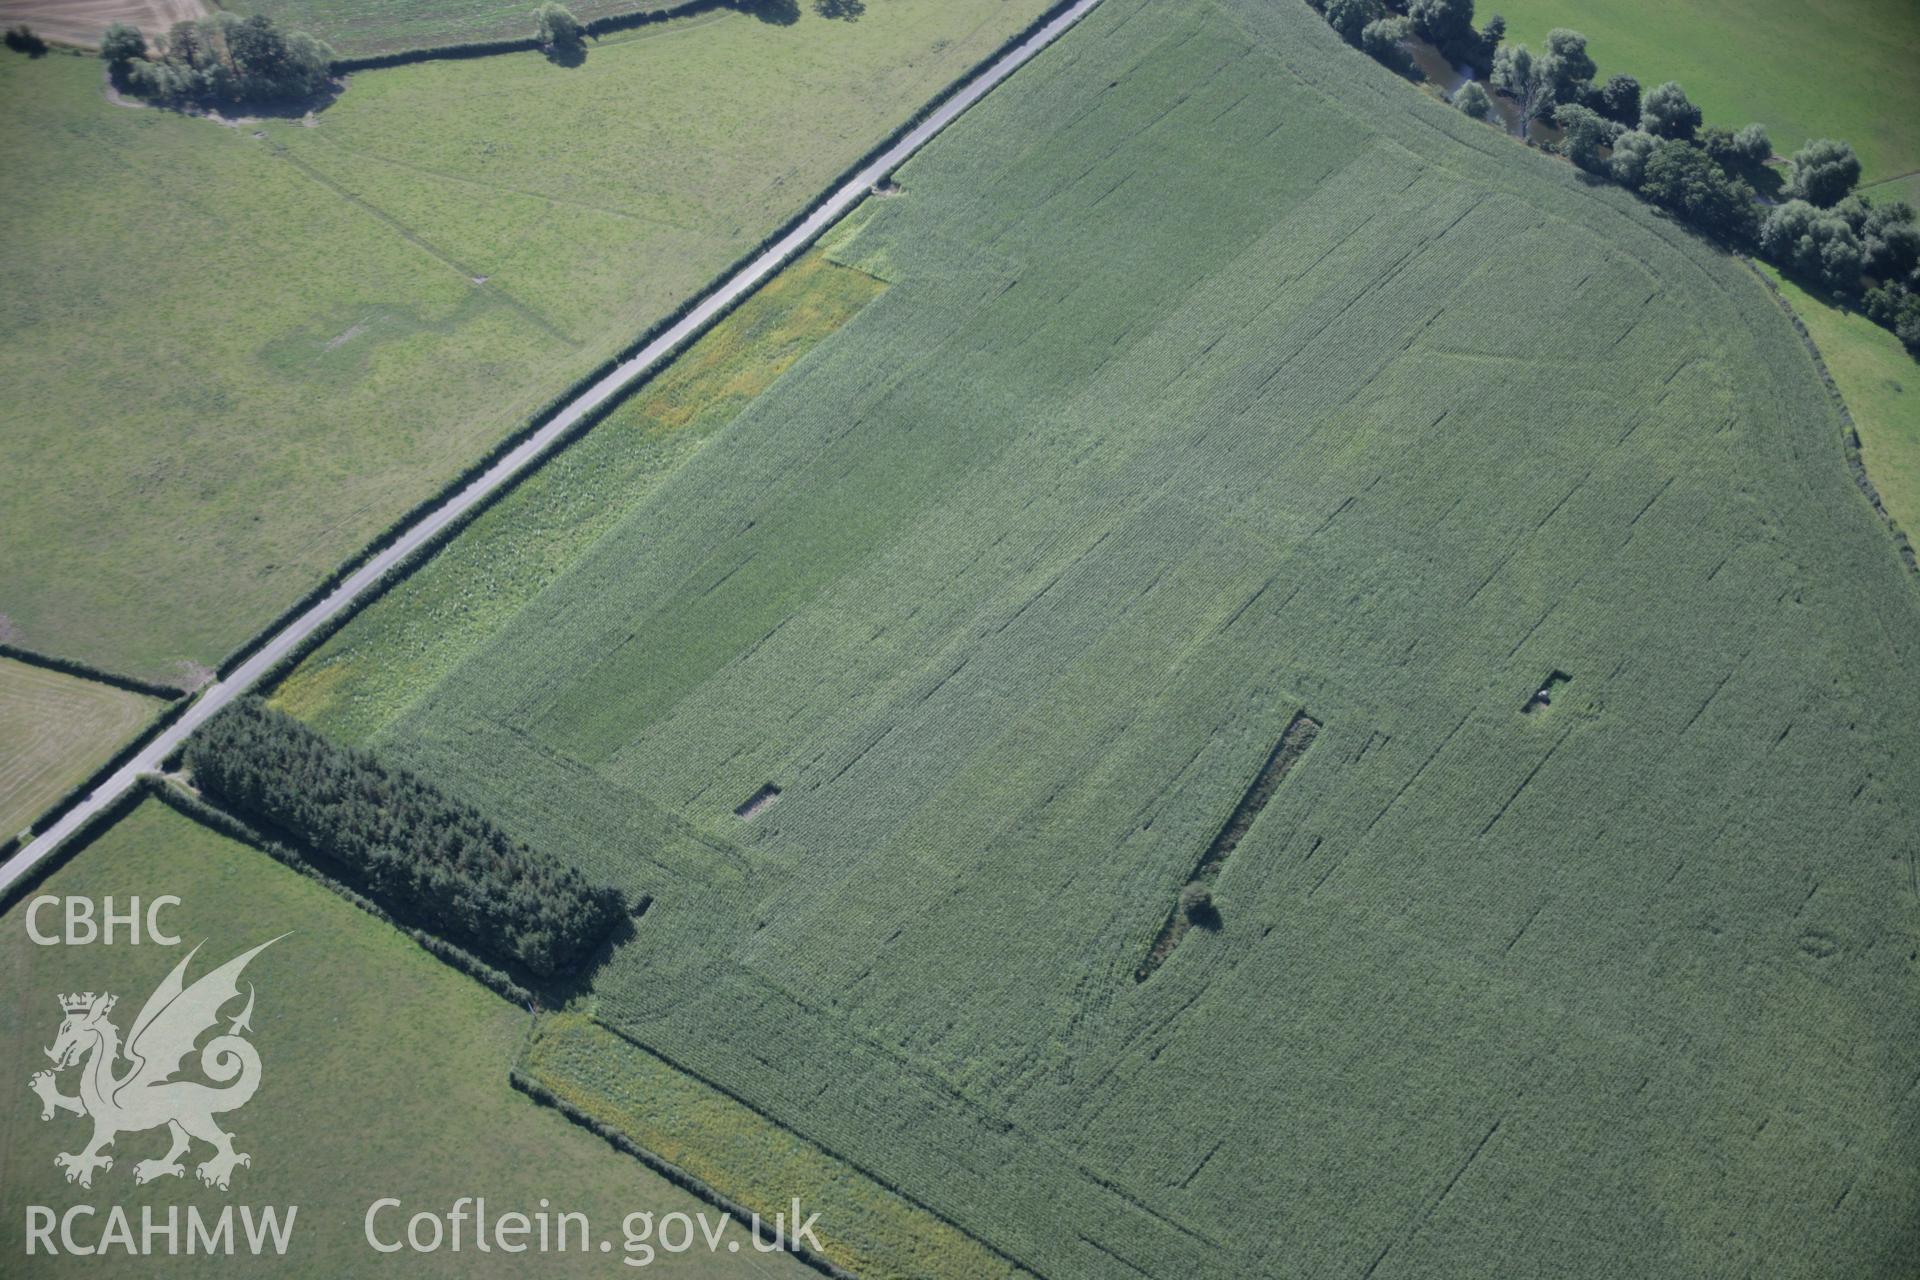 RCAHMW digital colour oblique photograph of Forden Gaer Roman Fort with emerging cropmarks viewed from the north-east. Taken on 02/09/2005 by T.G. Driver.